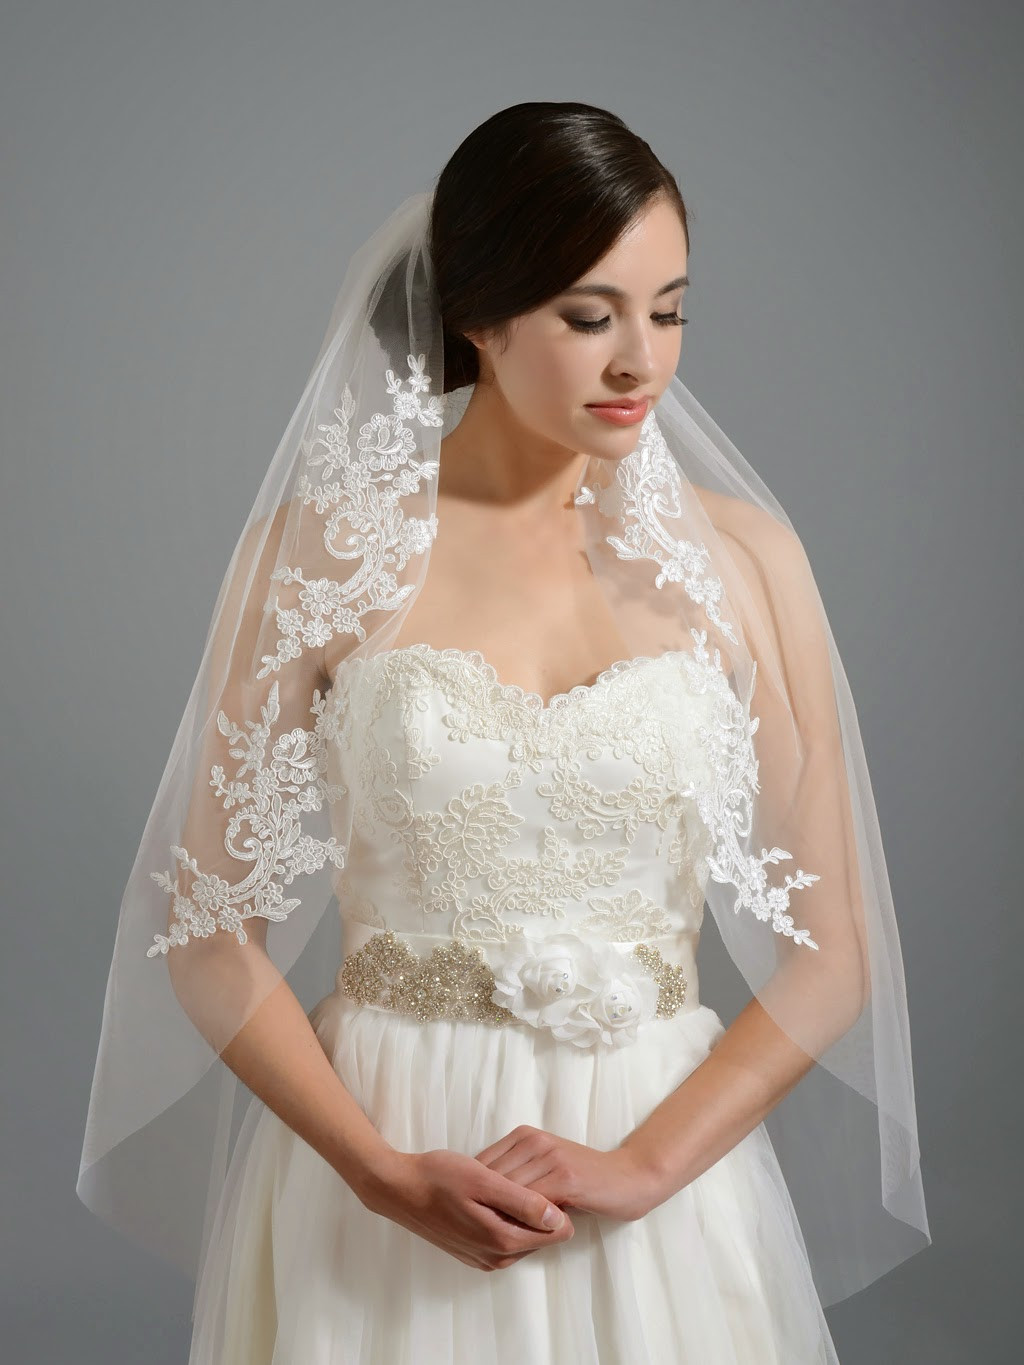 Veil In Wedding
 Wedding Veil How to Select the Perfect e